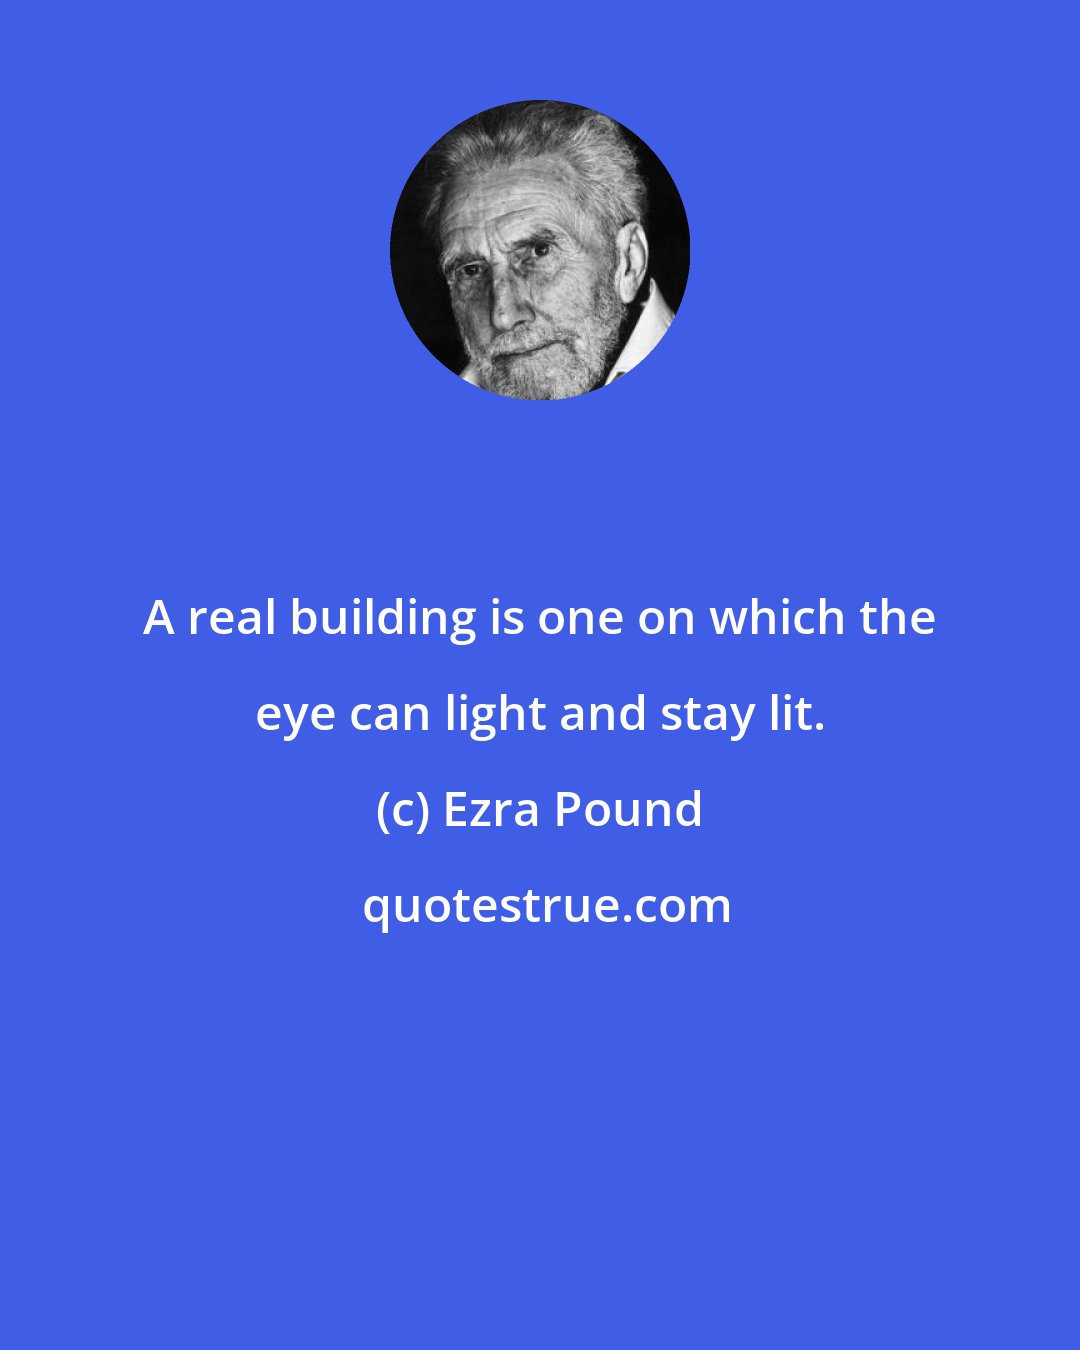 Ezra Pound: A real building is one on which the eye can light and stay lit.